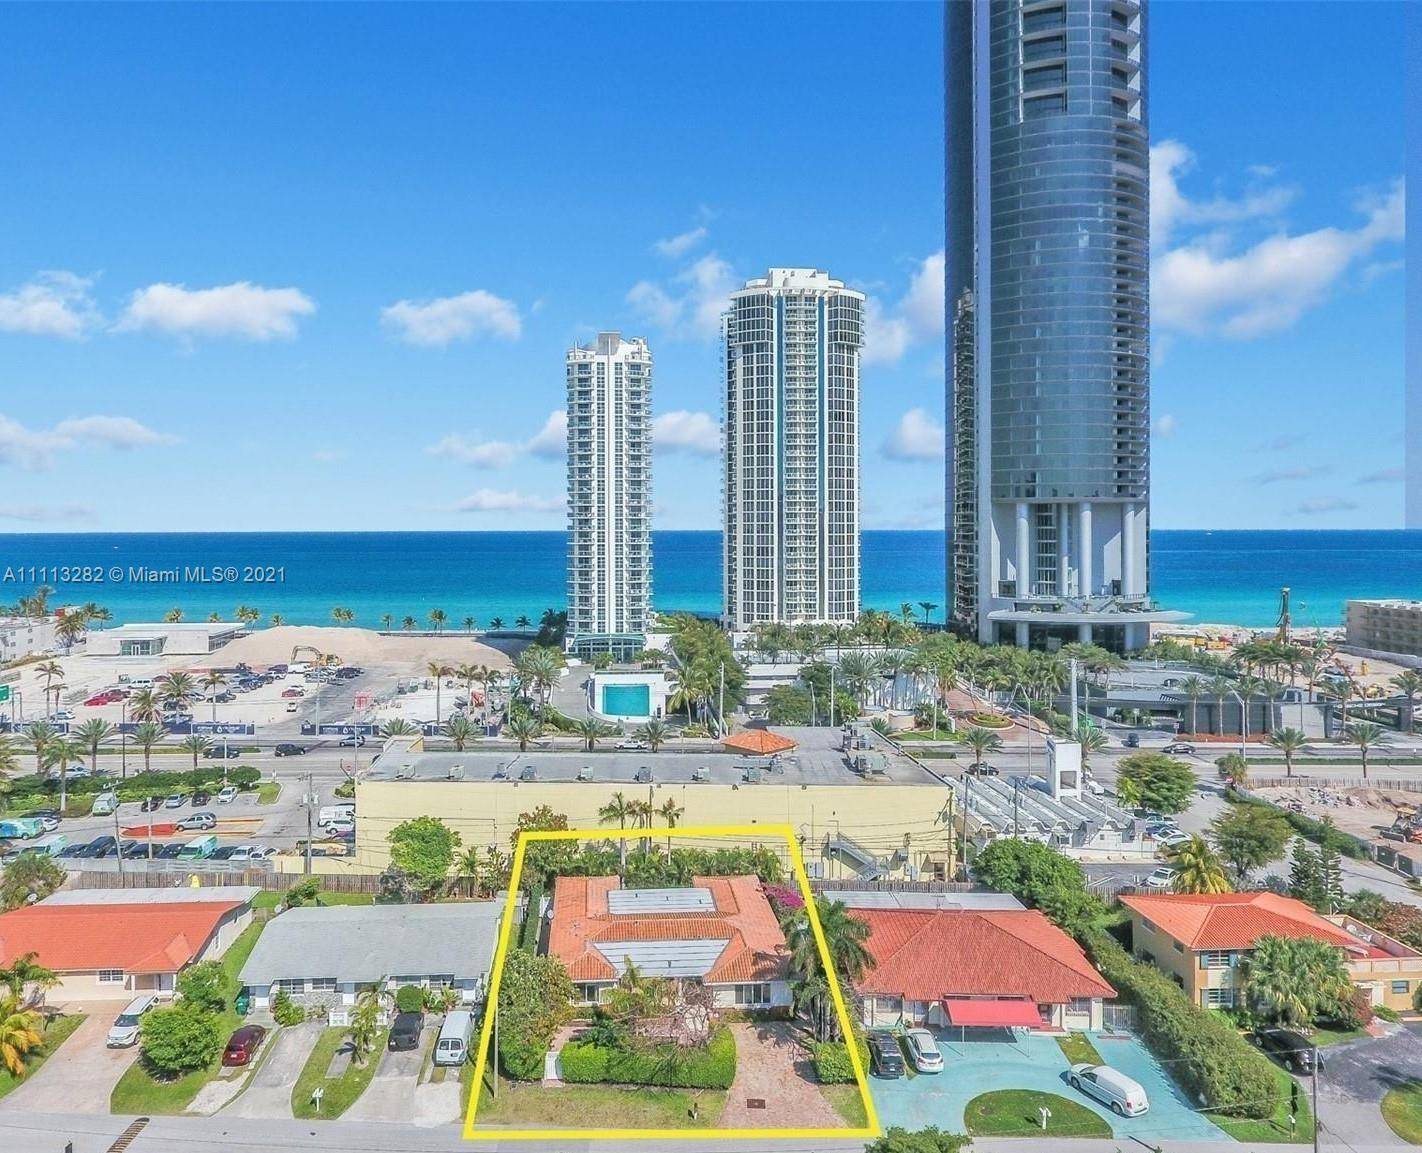 STILL AVAILABLE MODERN LIGHT SPASIOUS HOME totally upgraded masterpiece 5b 5b in Sunny Isles nestled steps away from the beach and sand cross to Porsche building !